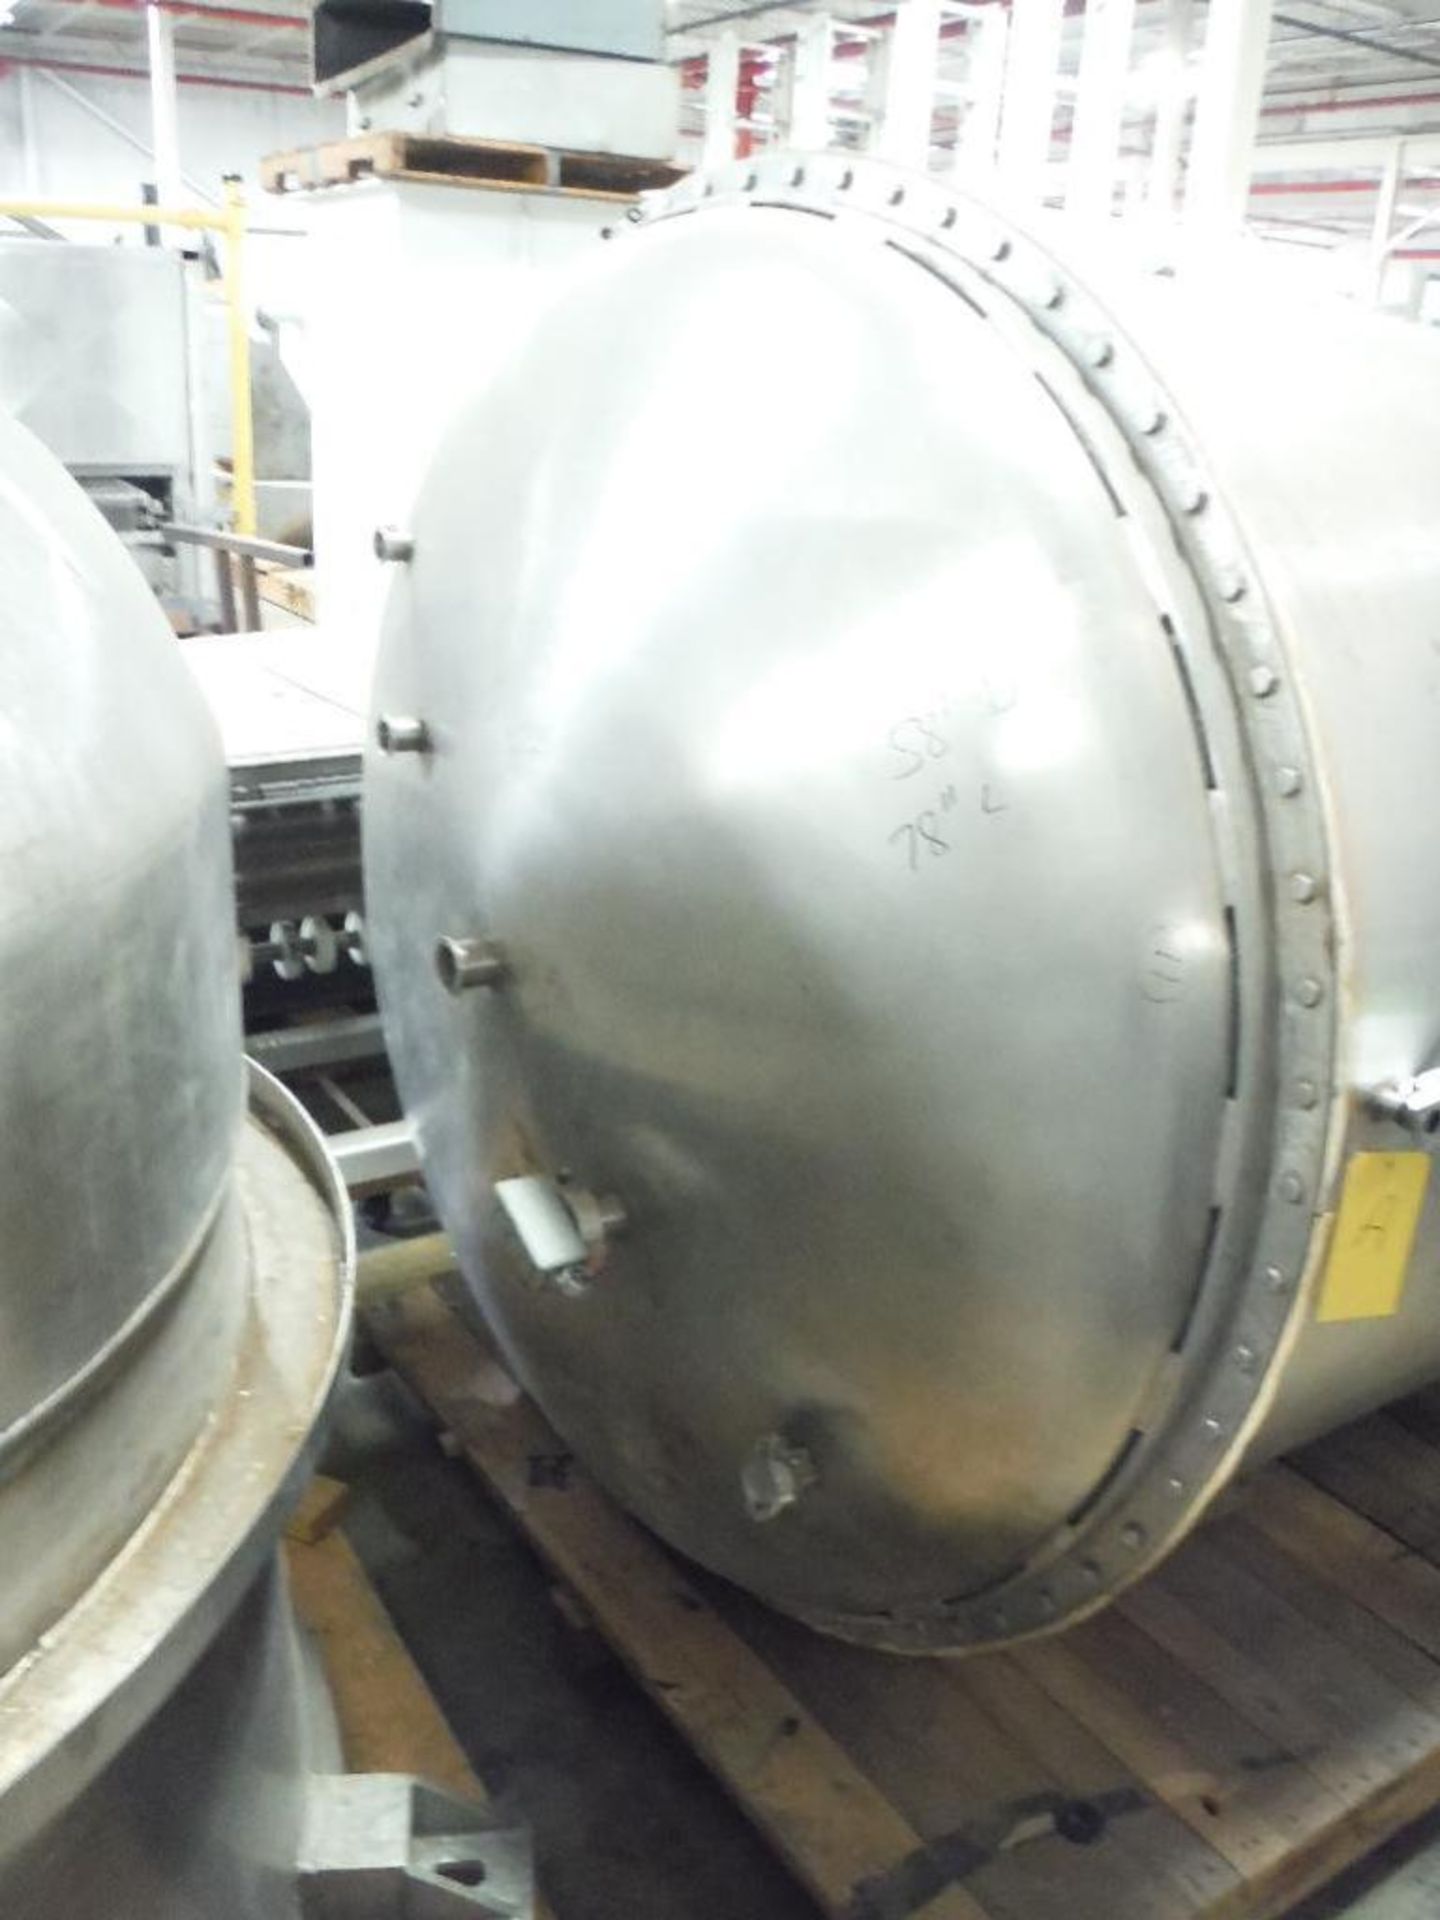 1992 Bulk mfg. SS pressure vessel, 316 SS, 15 psi, 58 in. dia x 78 in. straight side, dish top and b - Image 2 of 6